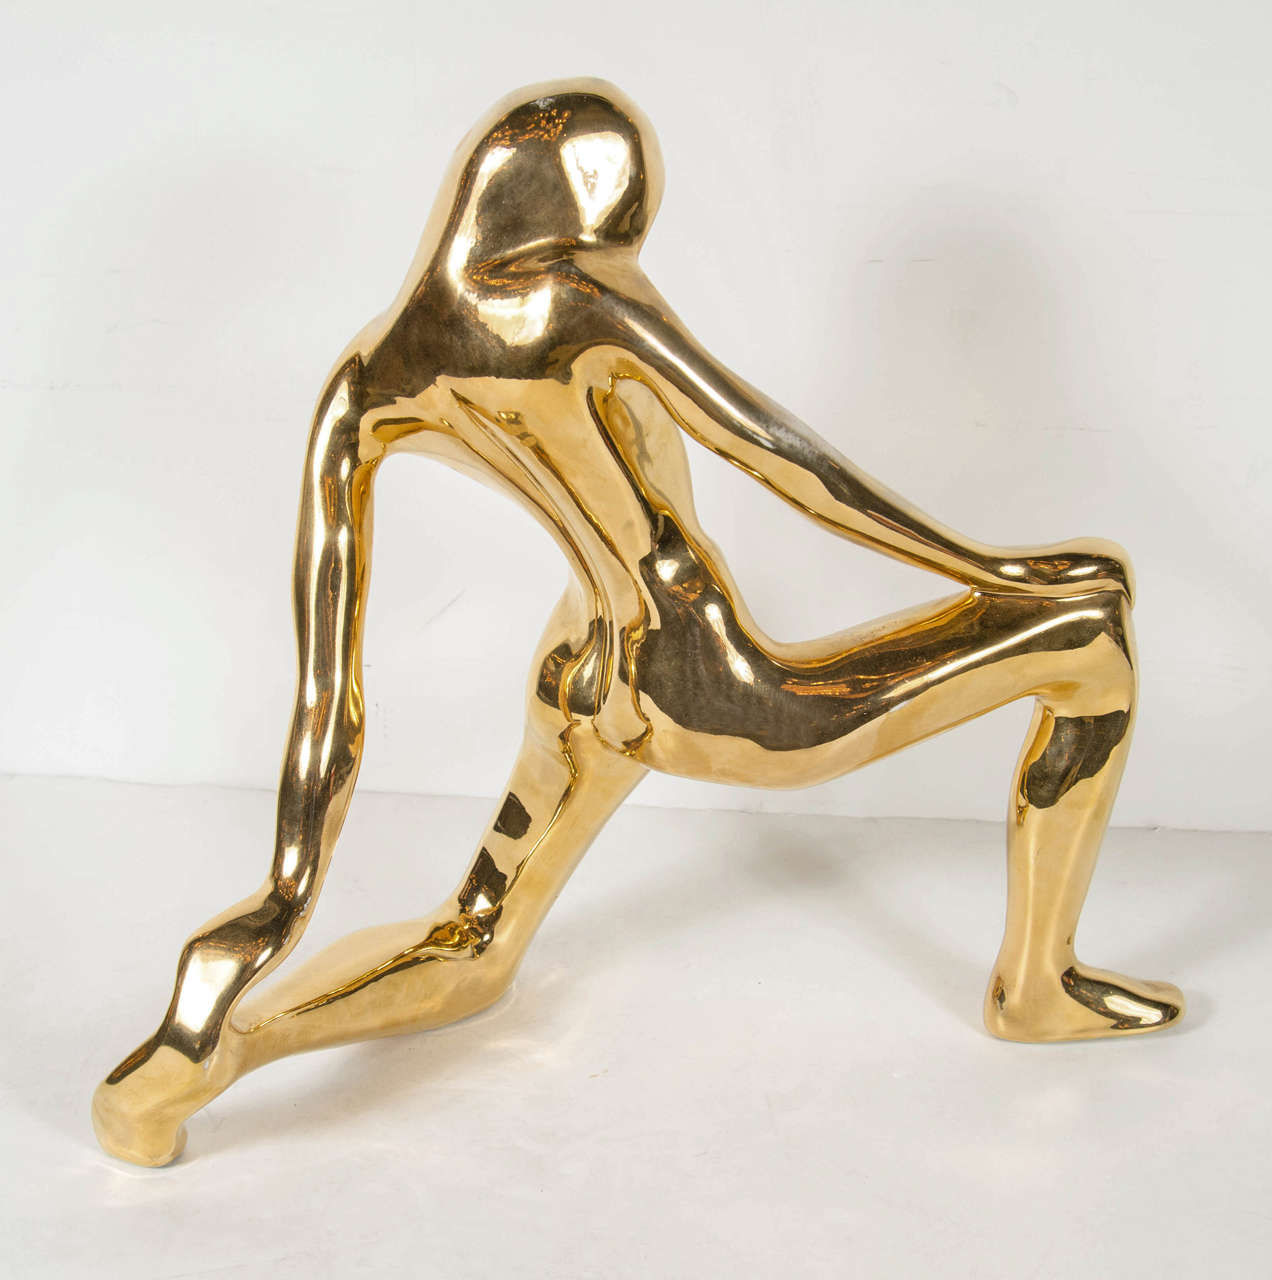 American Modernist Ceramic Gold Plated Kneeling Abstract Woman Sculpture by Jaru